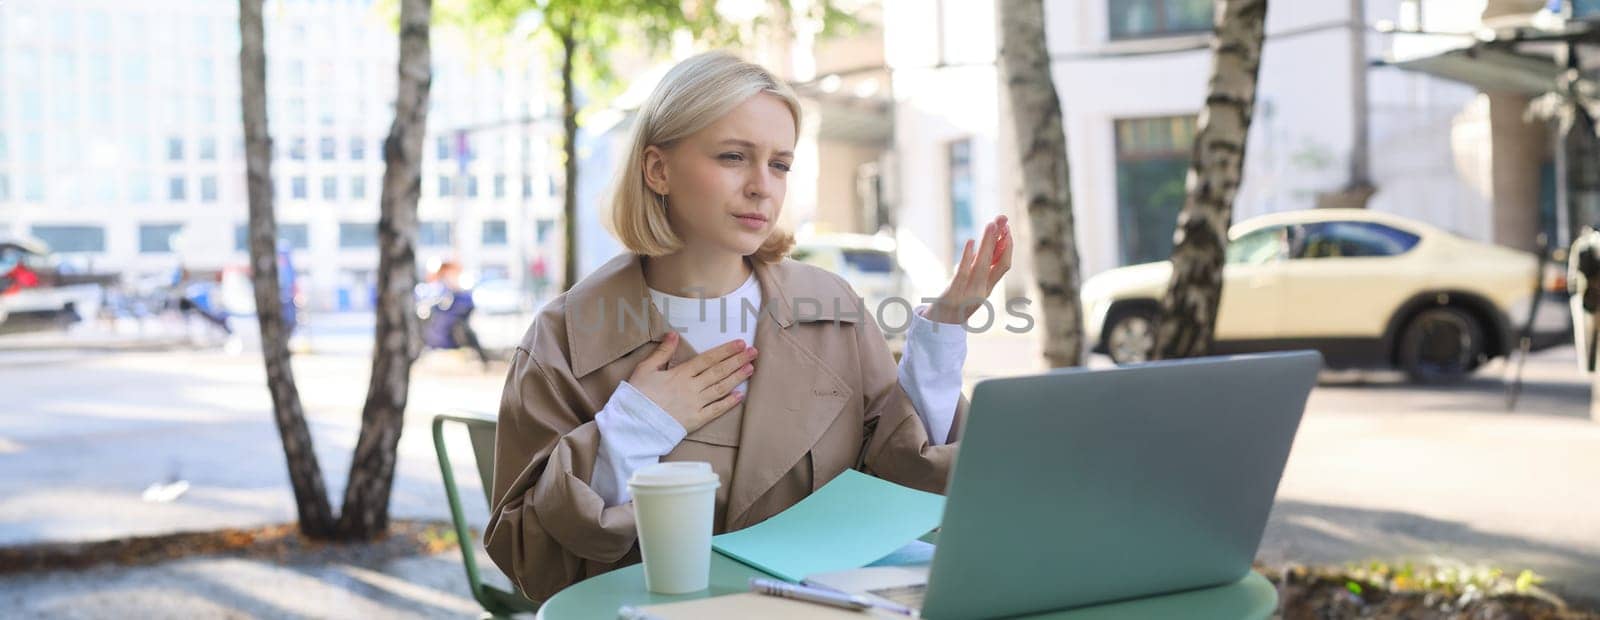 Image of woman talking, introducing herself during online meeting, using laptop in outdoor cafe, working remotely, drinking coffee.